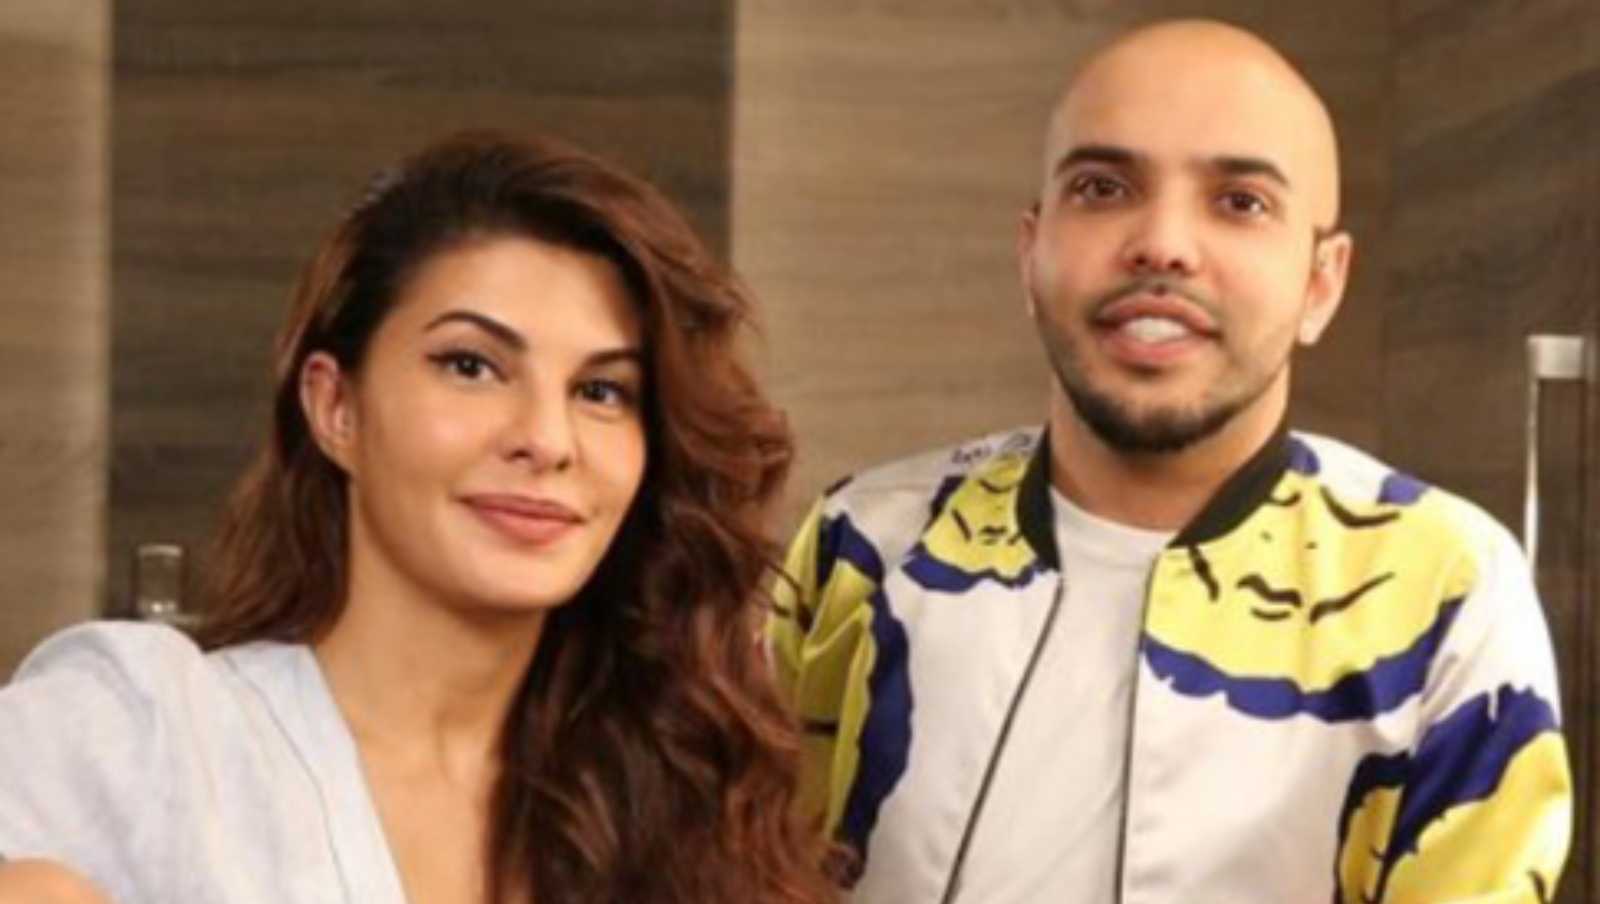 Jacqueline Fernandez's makeup artist Shaan Muttathil alleges RRR team bought their Oscar award, says 'what all we can get if we have money'